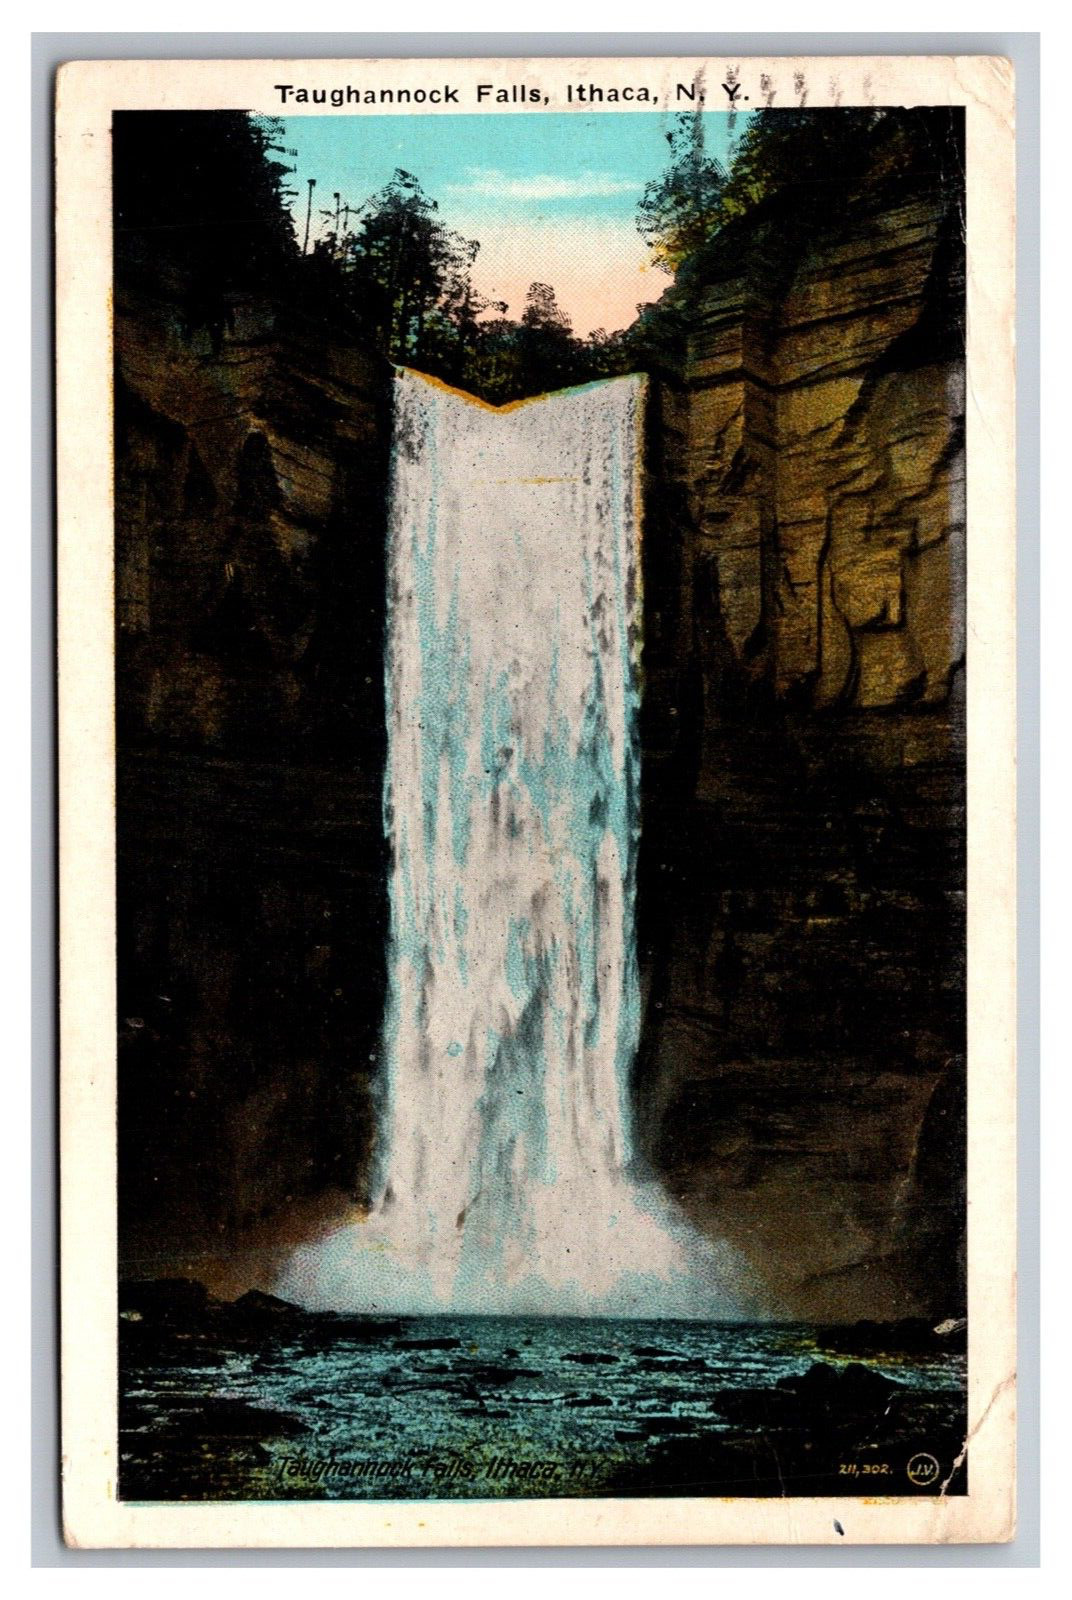 Ithaca NY Taughannock Falls White Border Postcard Posted 1924